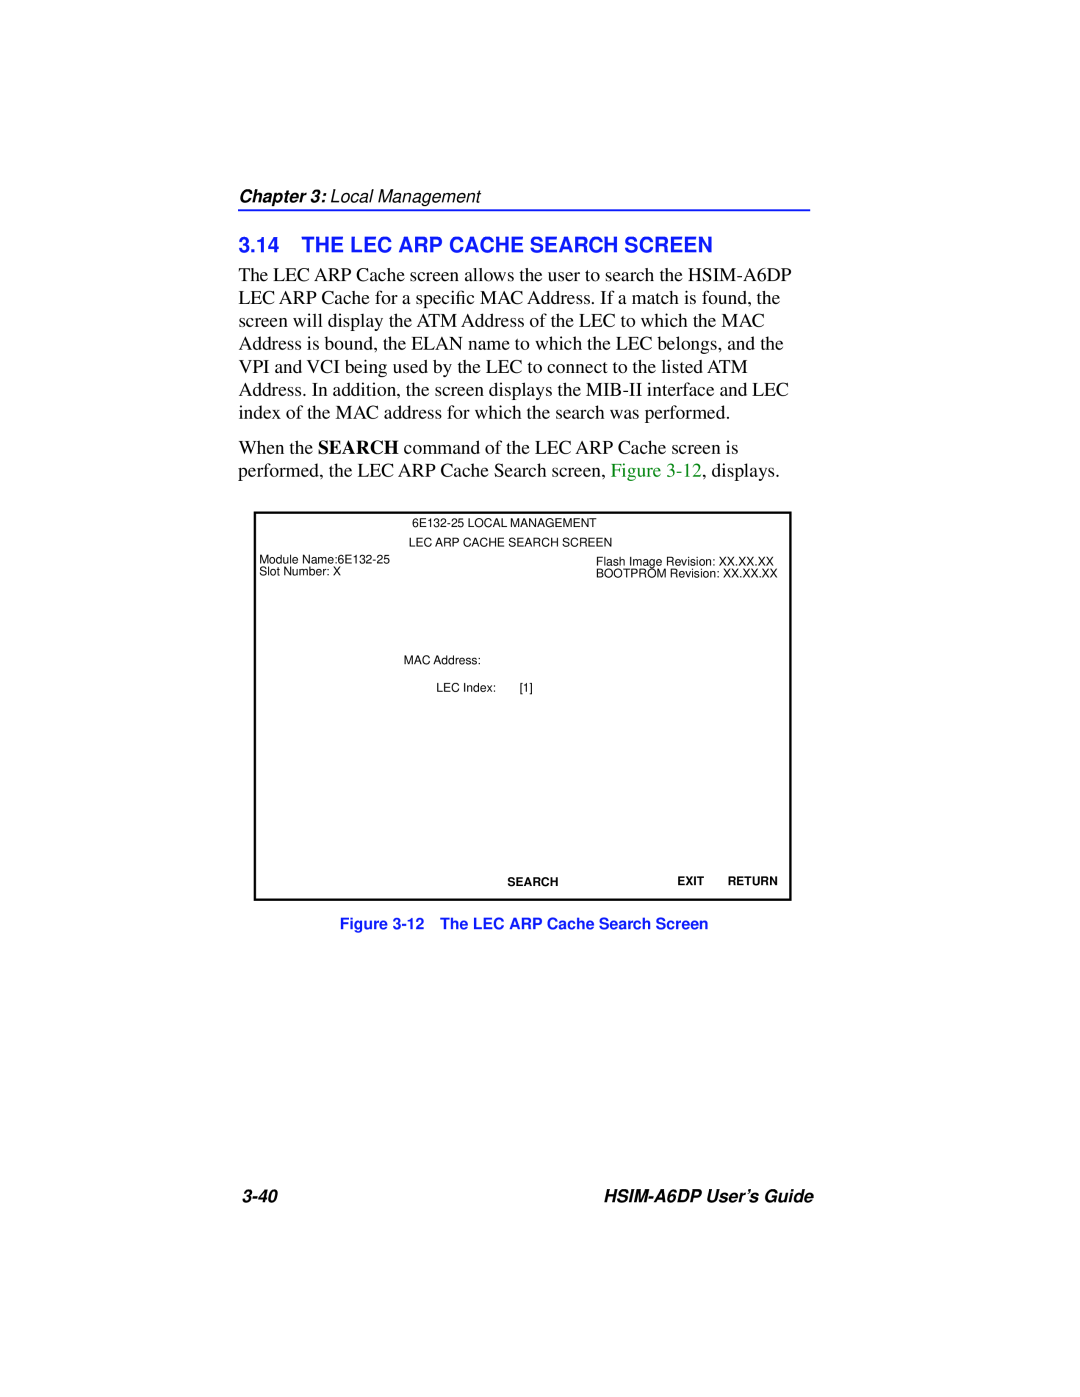 Cabletron Systems HSIM-A6DP manual The Lec Arp Cache Search Screen, 12 The LEC ARP Cache Search Screen 